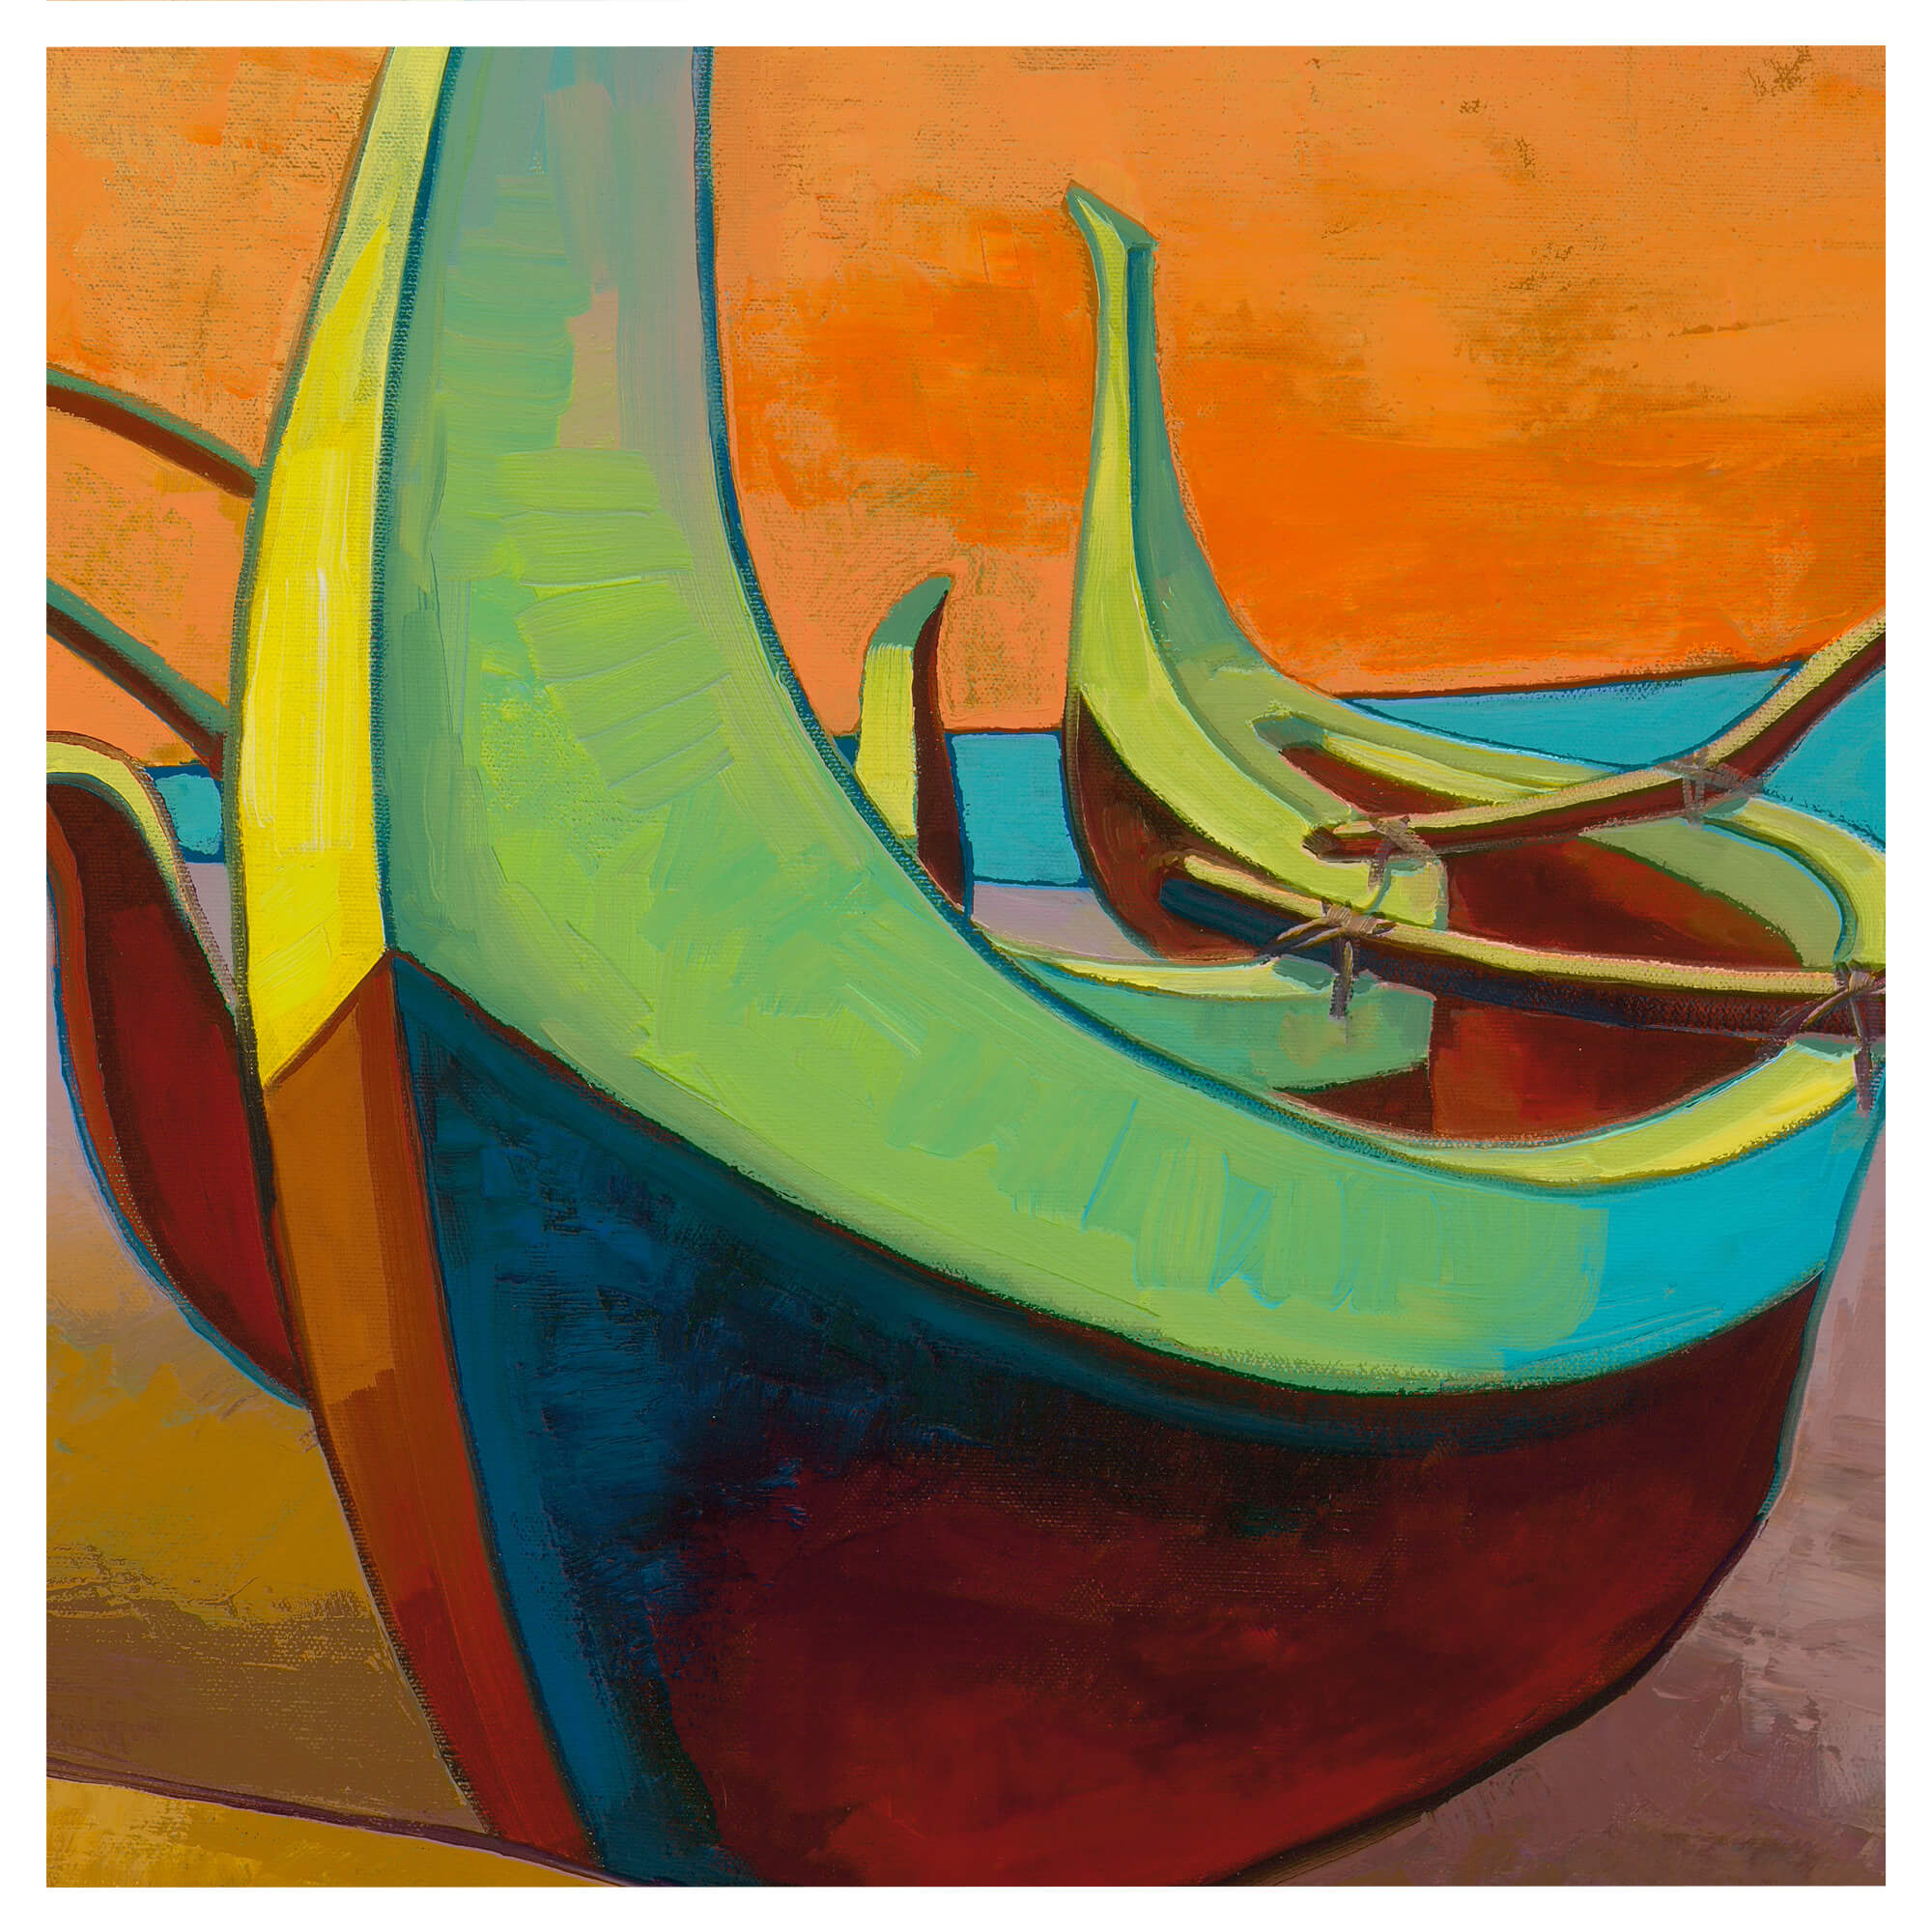 A boat by the beach by Hawaii artist Colin Rdican